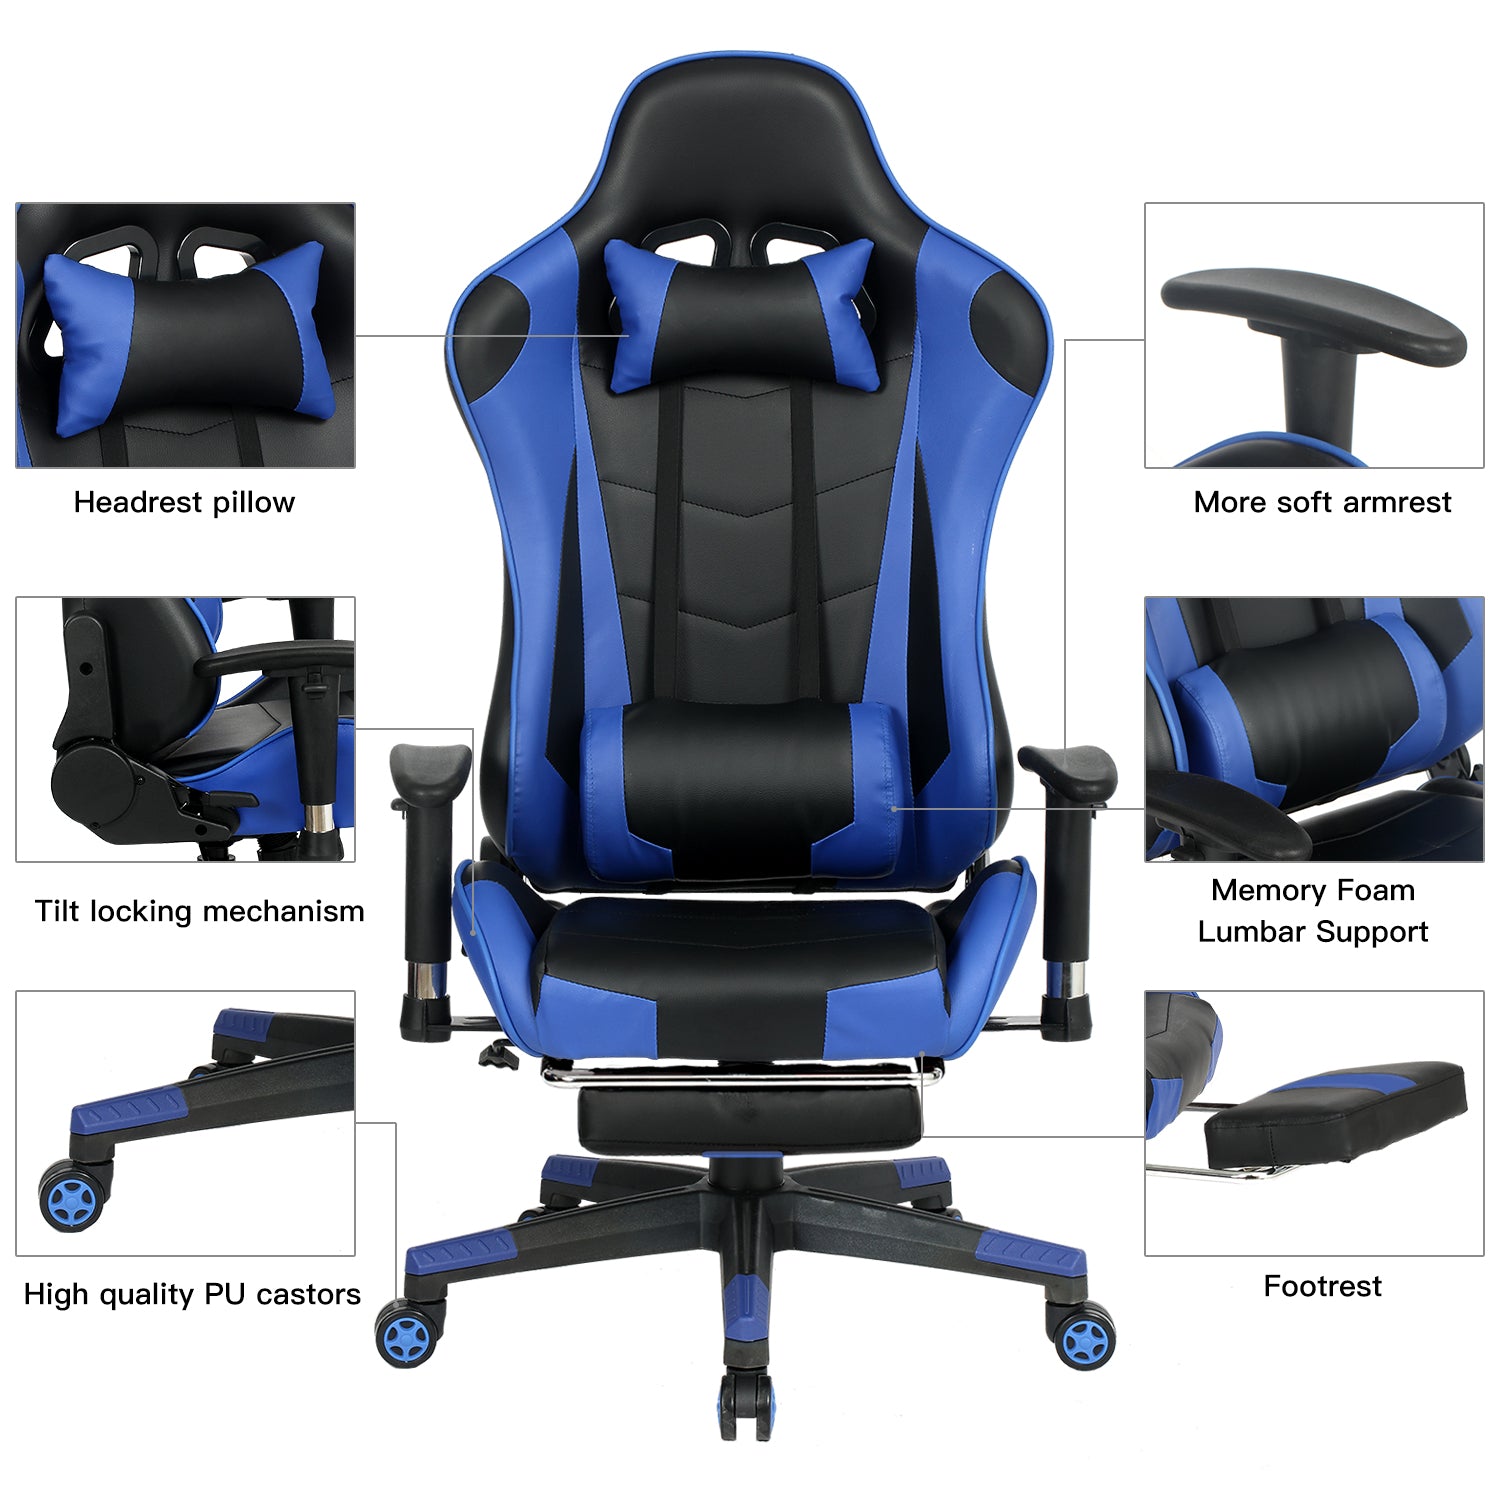 RaDEWAY Gaming Chair With Footrest, Ergonomic High-Back Leather Racing Computer Chair Home Office Chair With Headrest, Footrest and Lumbar Support